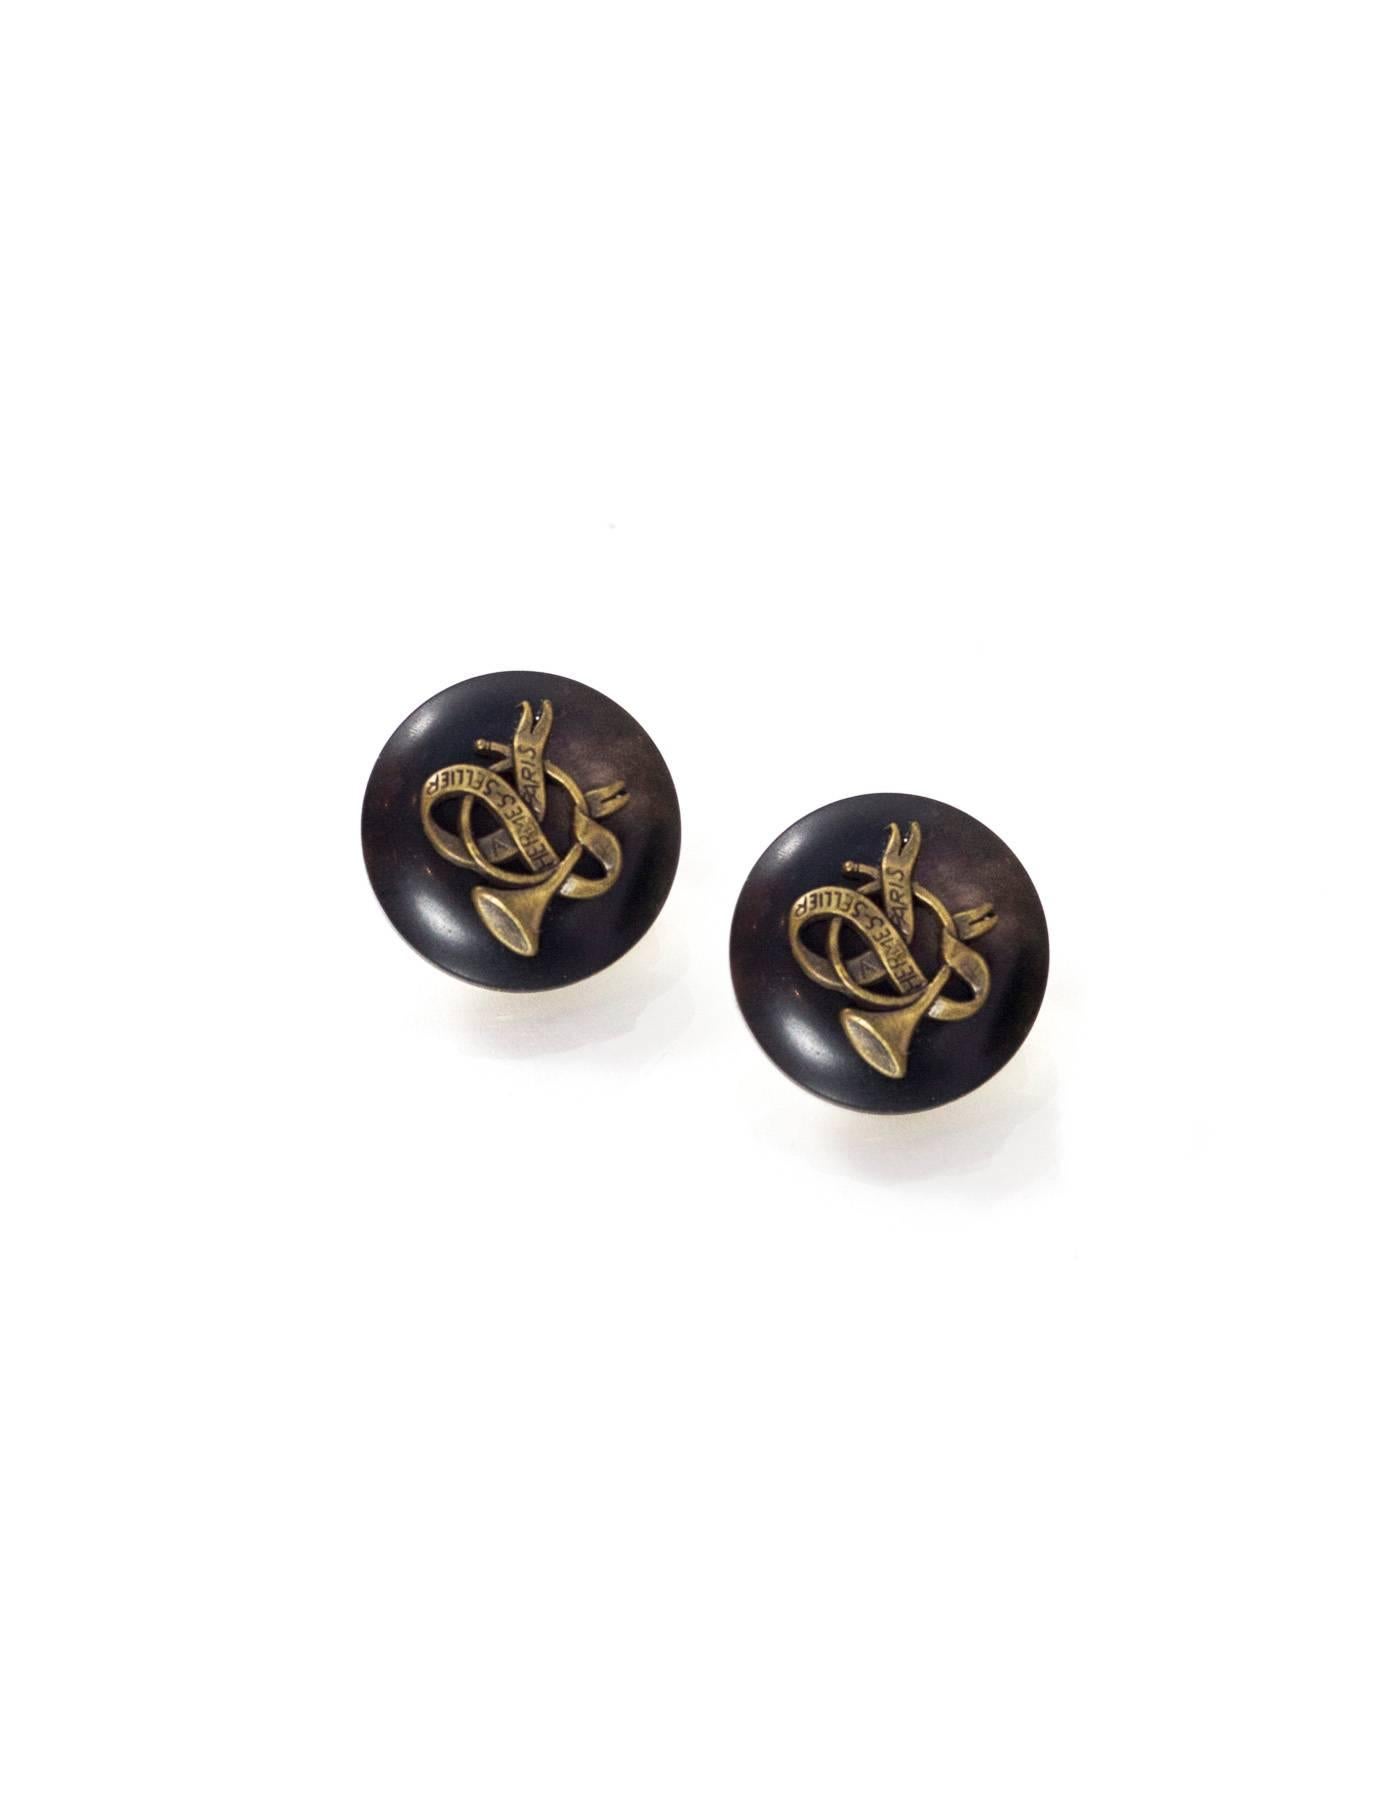 Hermes Vintage Clip-On Earrings
Features French horn motif

Color: Goldtone, brown, brass
Materials: Metal, wood
Closure: Clip on
Overall Condition: Excellent vintage, pre-owned condition with minor surface marks

Included: Hermes box
Measurements: